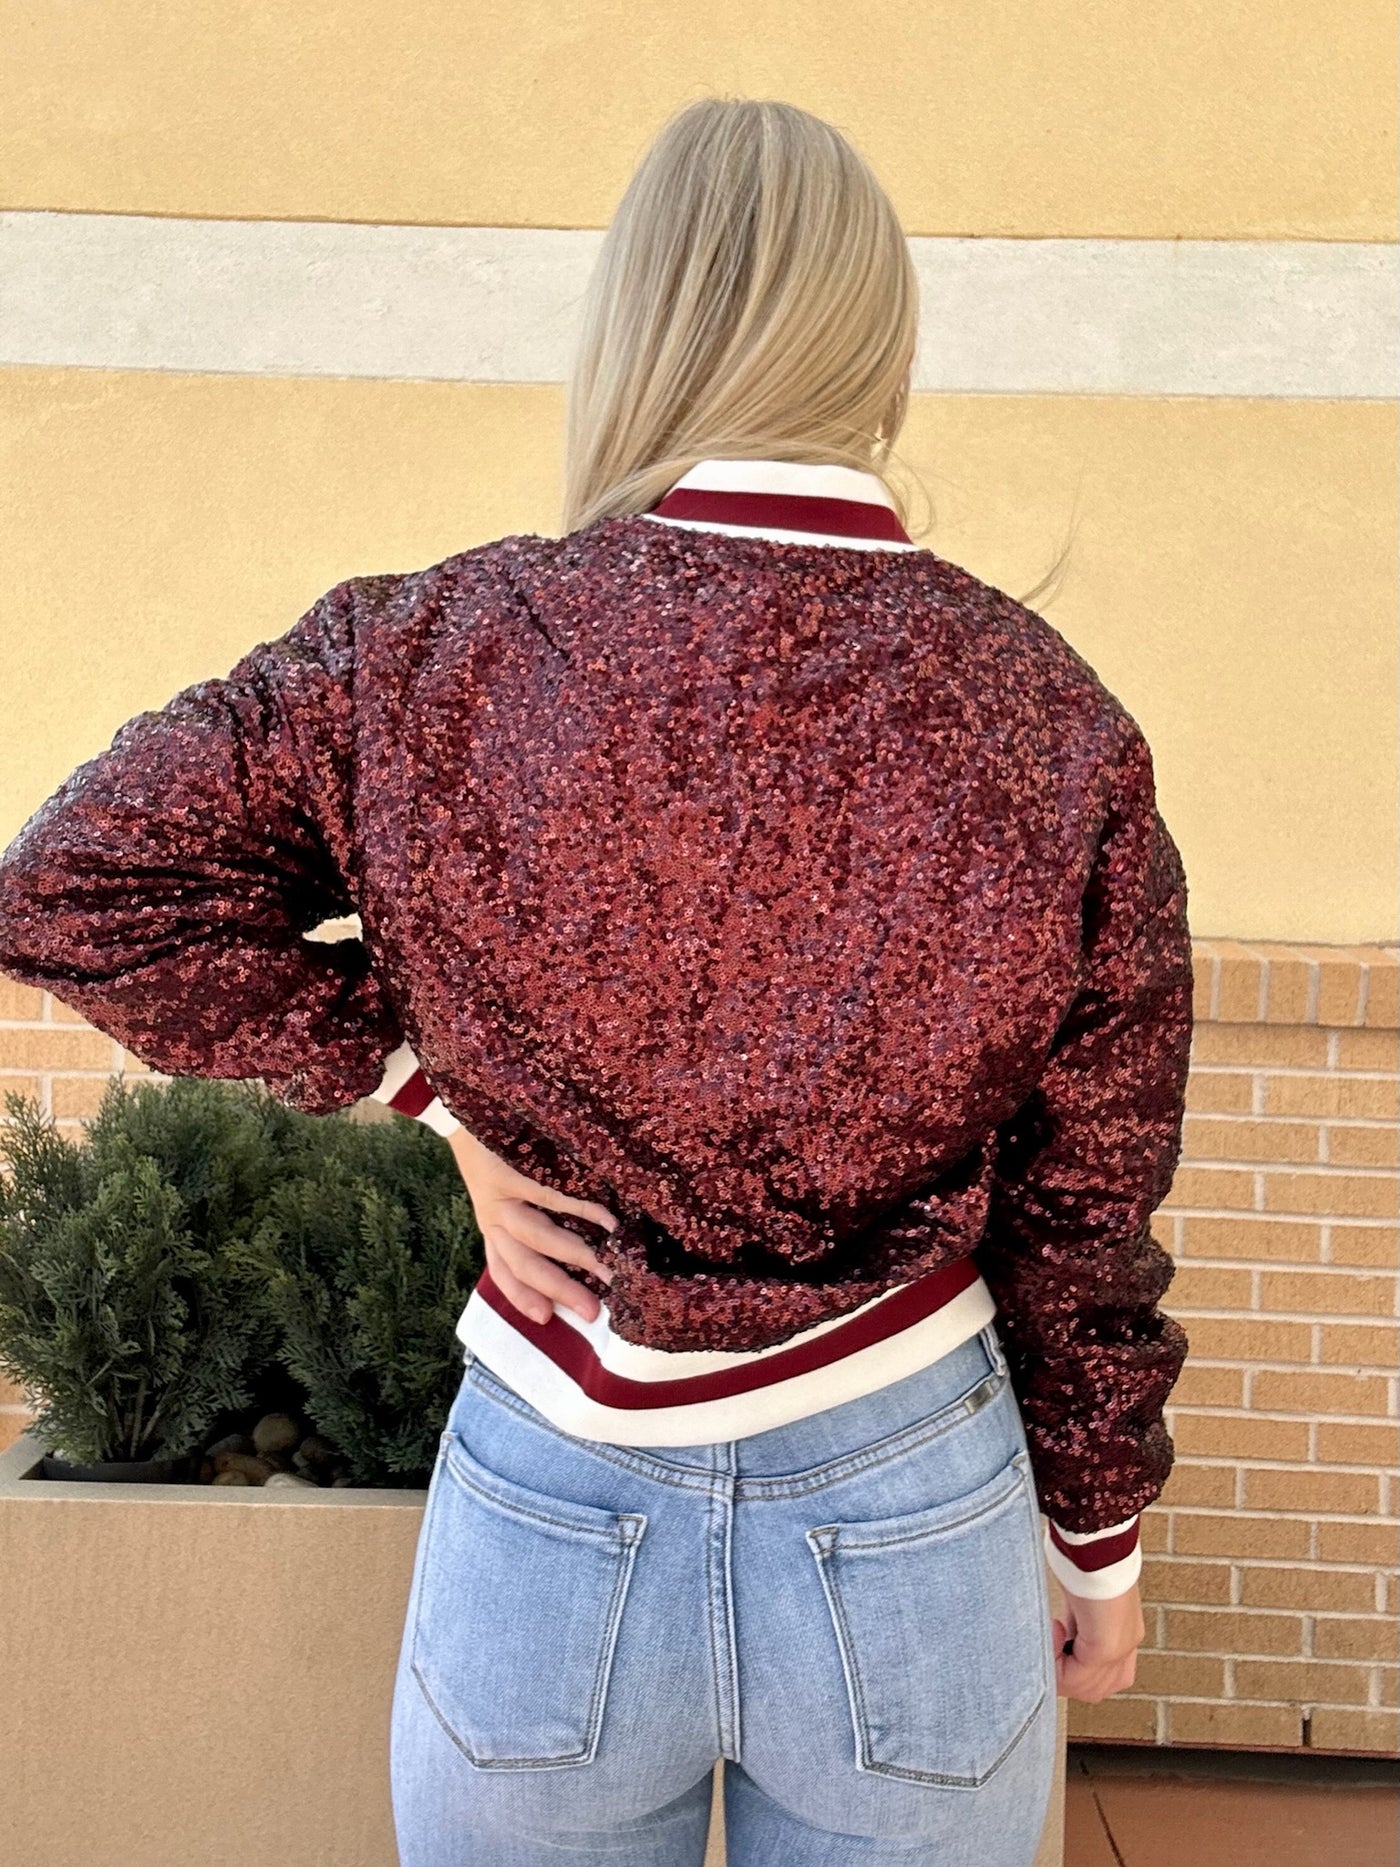 BACK VIEW OF  AVA IN JACKET